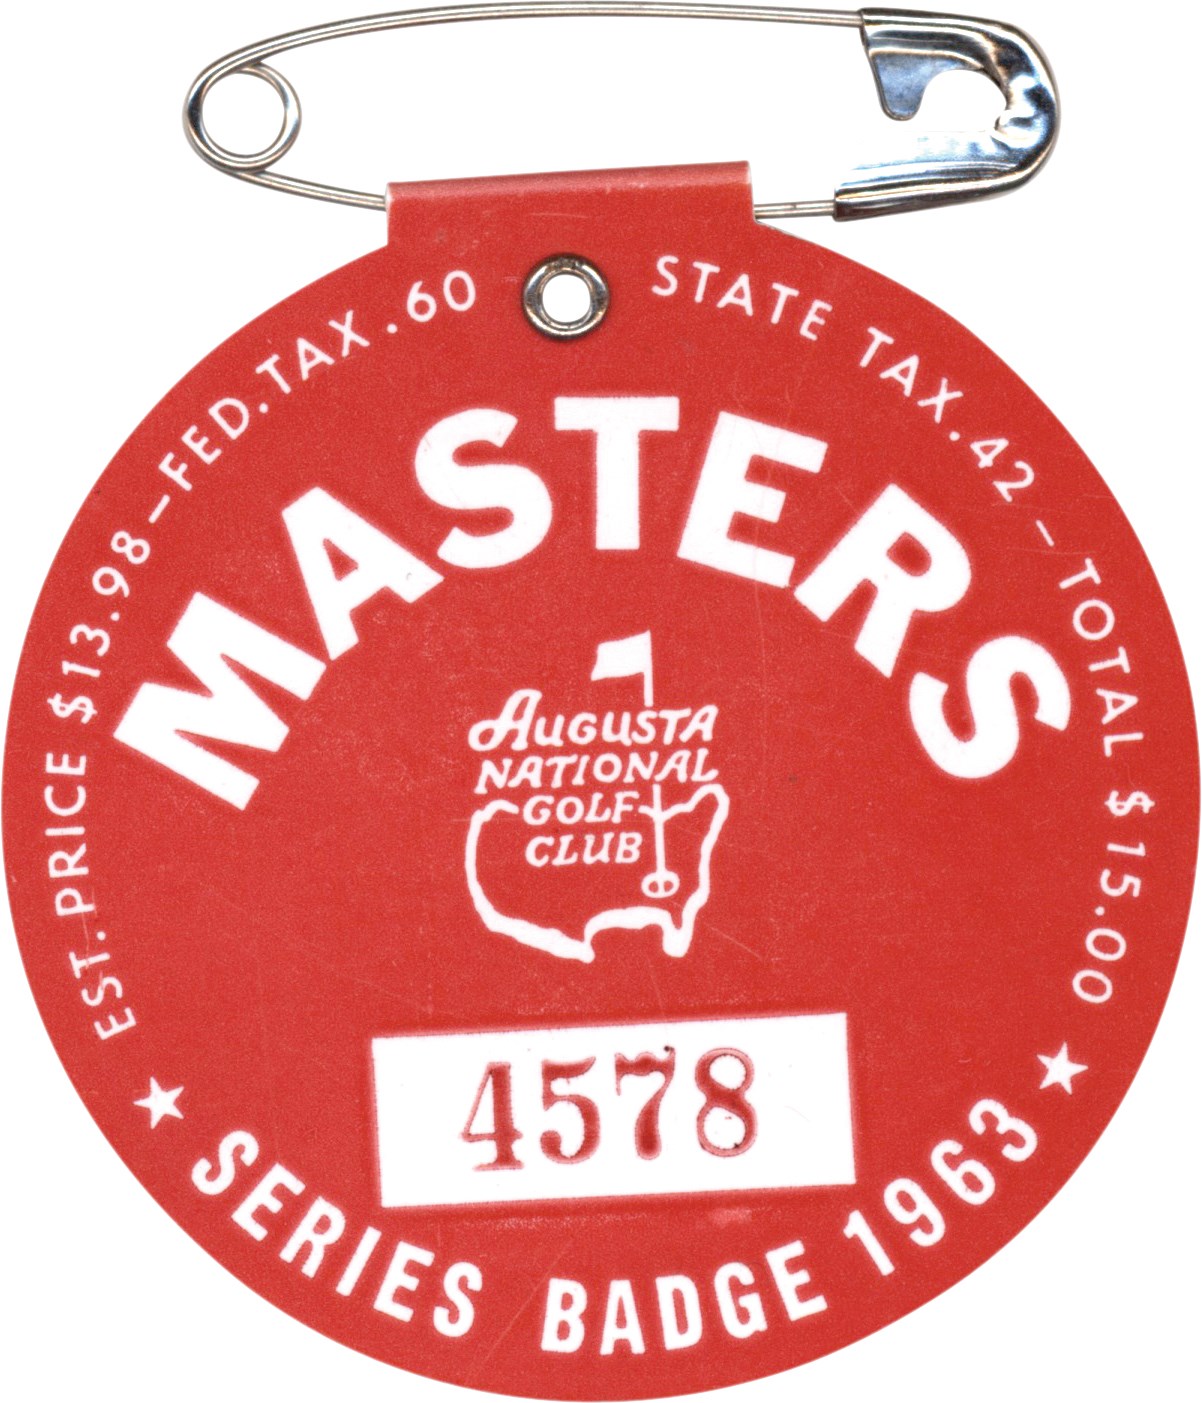 Olympics and All Sports - 1963 Masters Badge - Jack Nicklaus First Masters Win